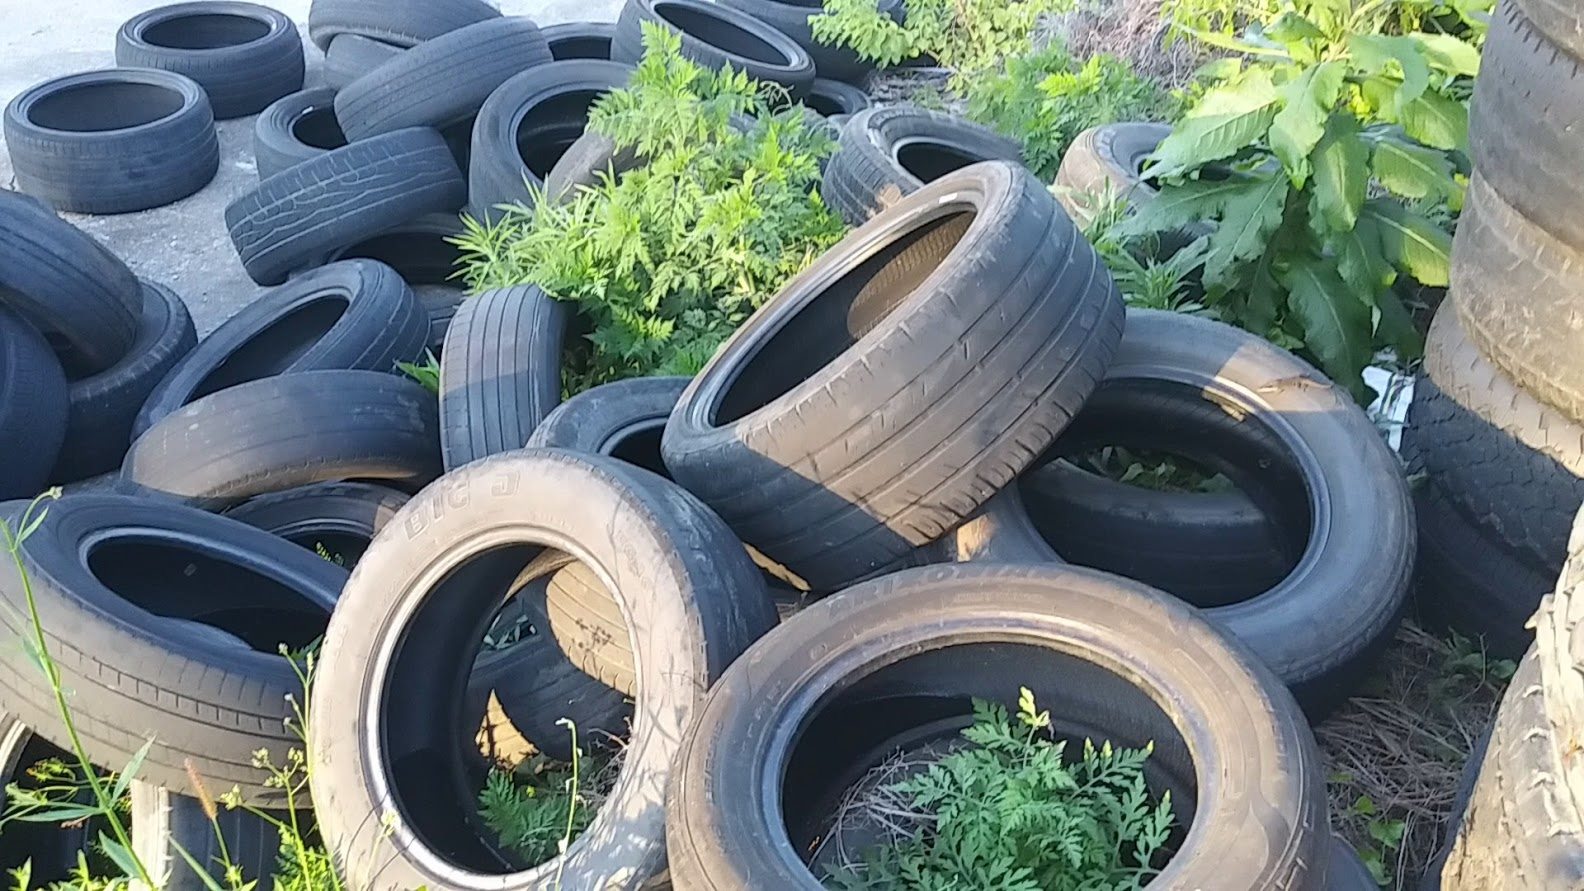 How to Dispose of Old Tires in Louisiana 